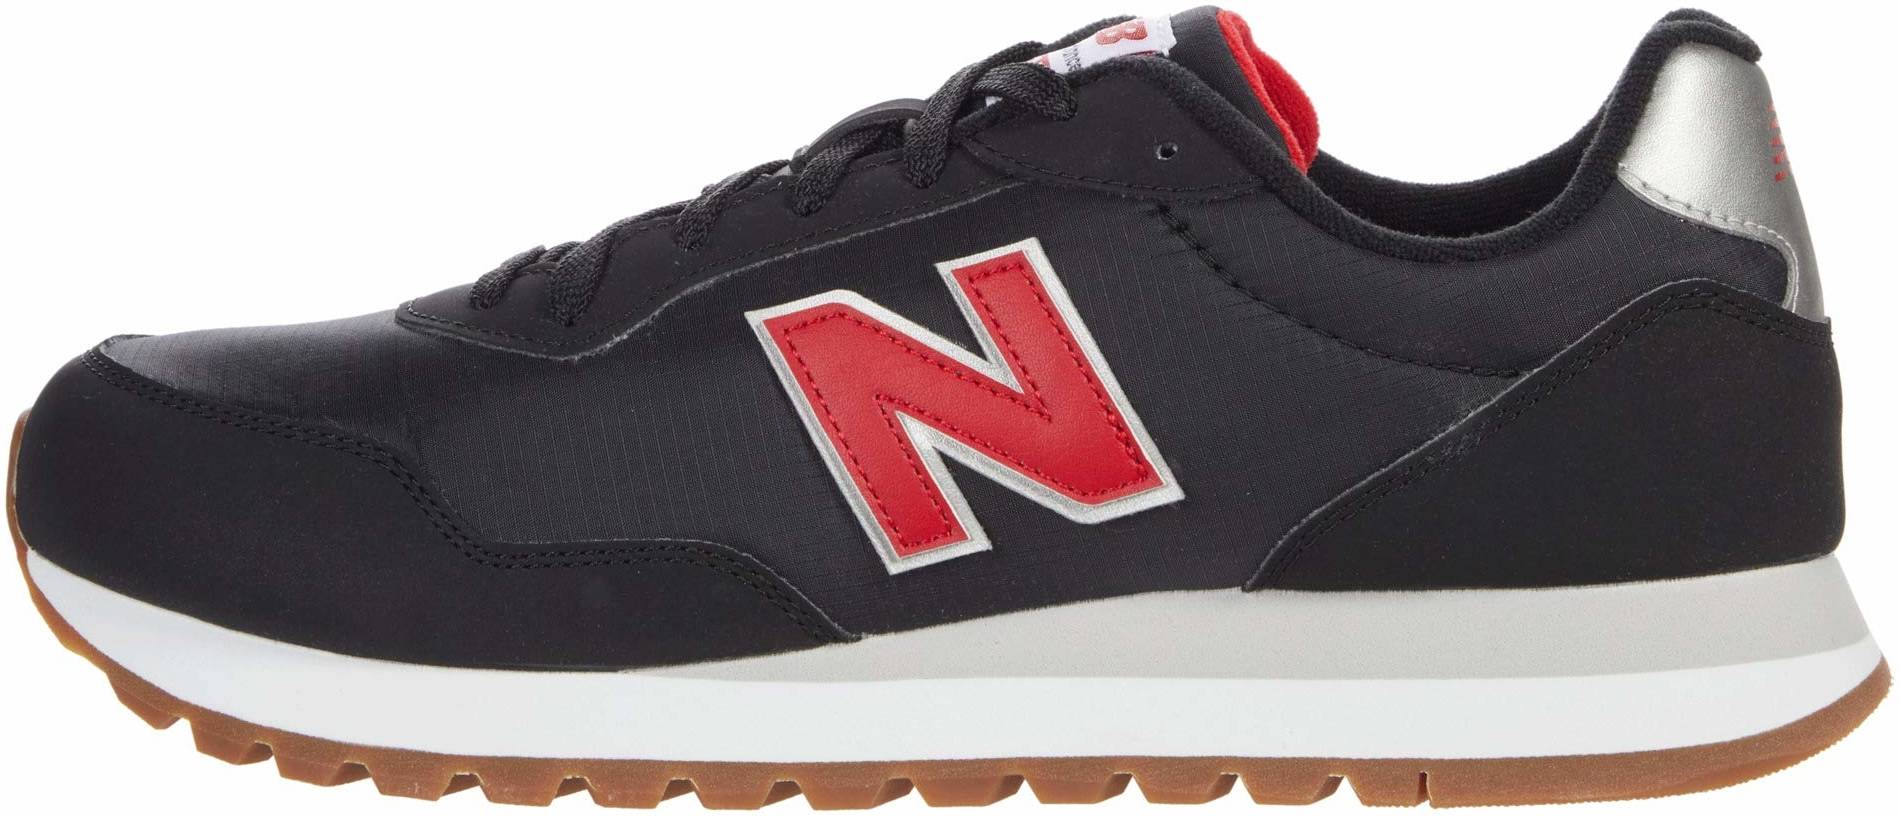 40 New Balance leather sneakers - Save 57% | RunRepeat